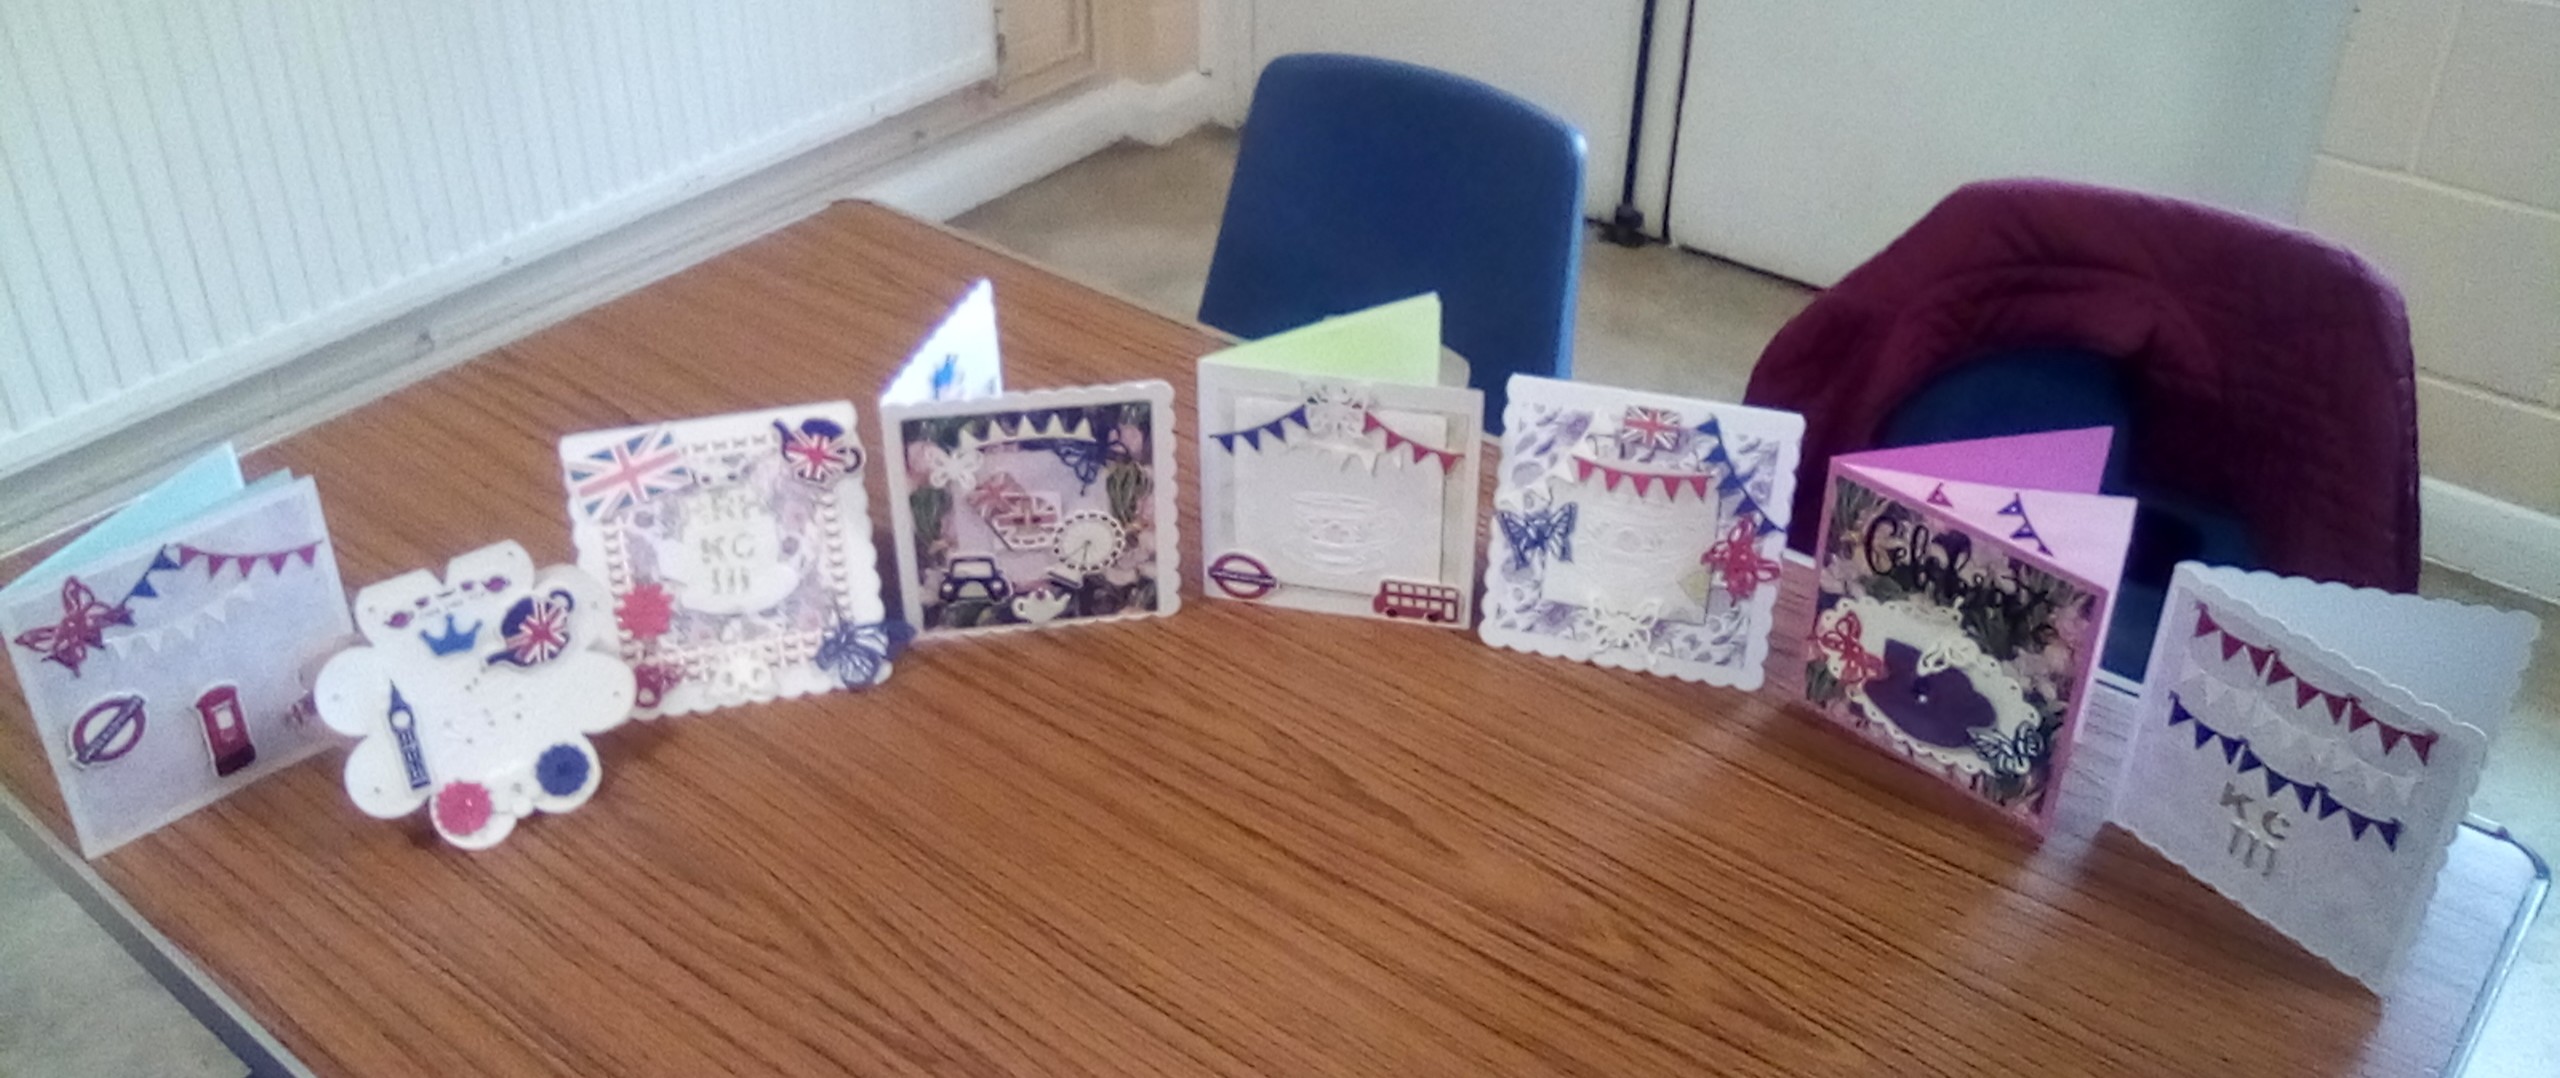 Some cards from our April meeting